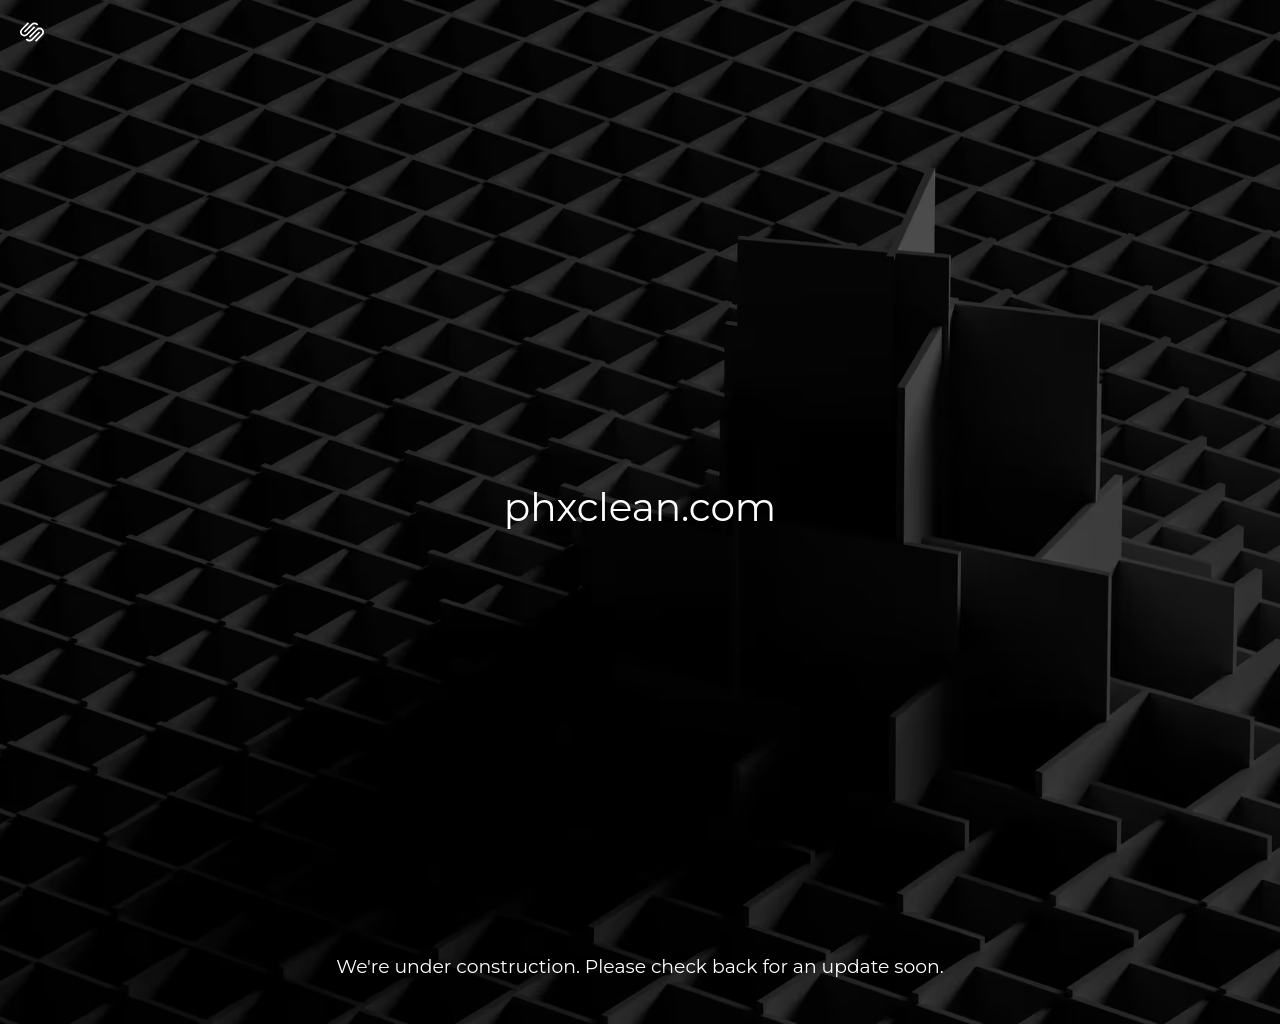 phxclean.com